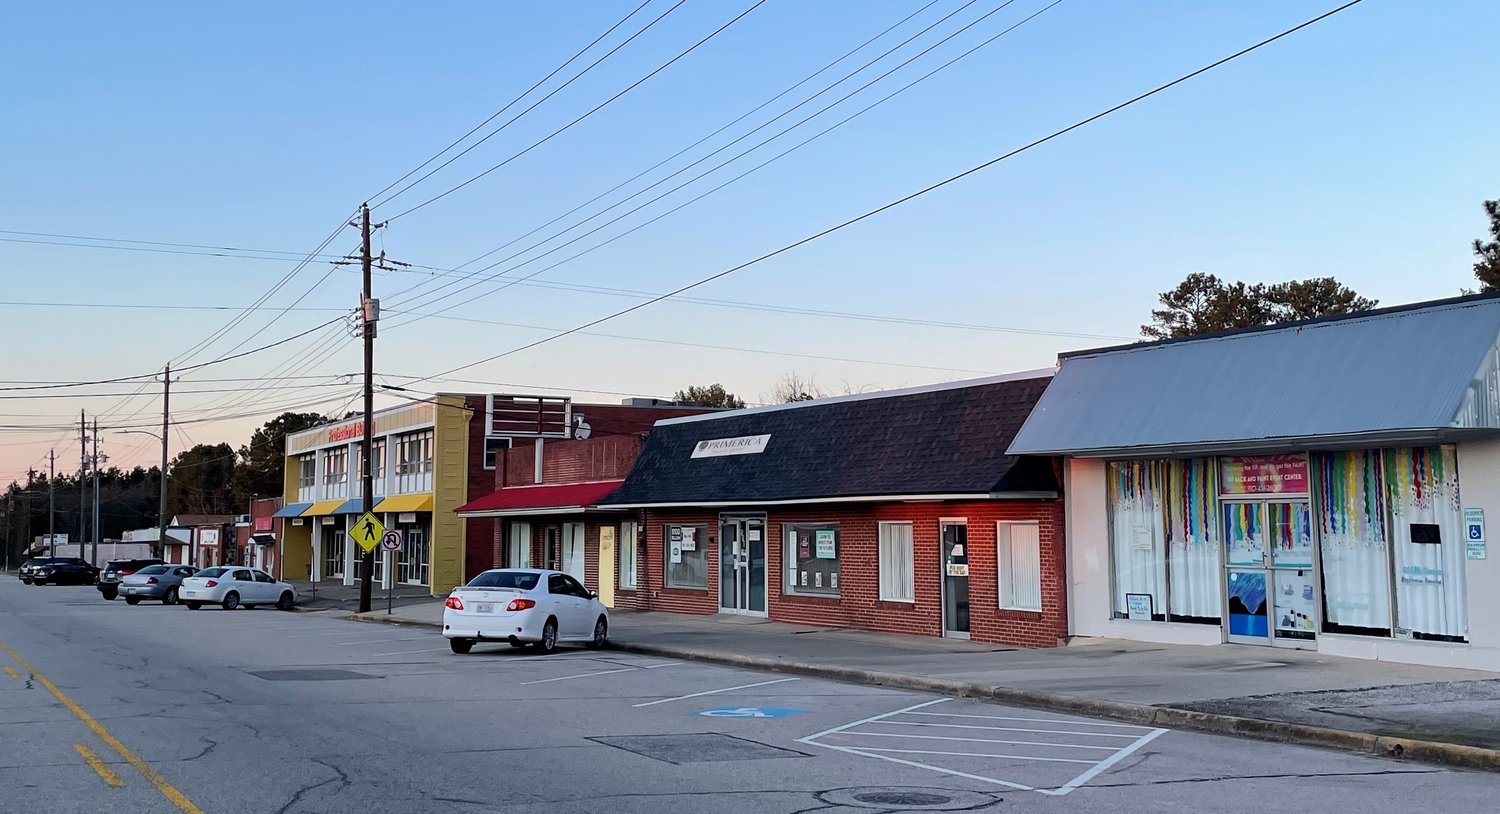 Downtown revitalization is one of the areas that Spring Lake residents and business owners said they would like to see addressed in an updated land-use plan for the town.